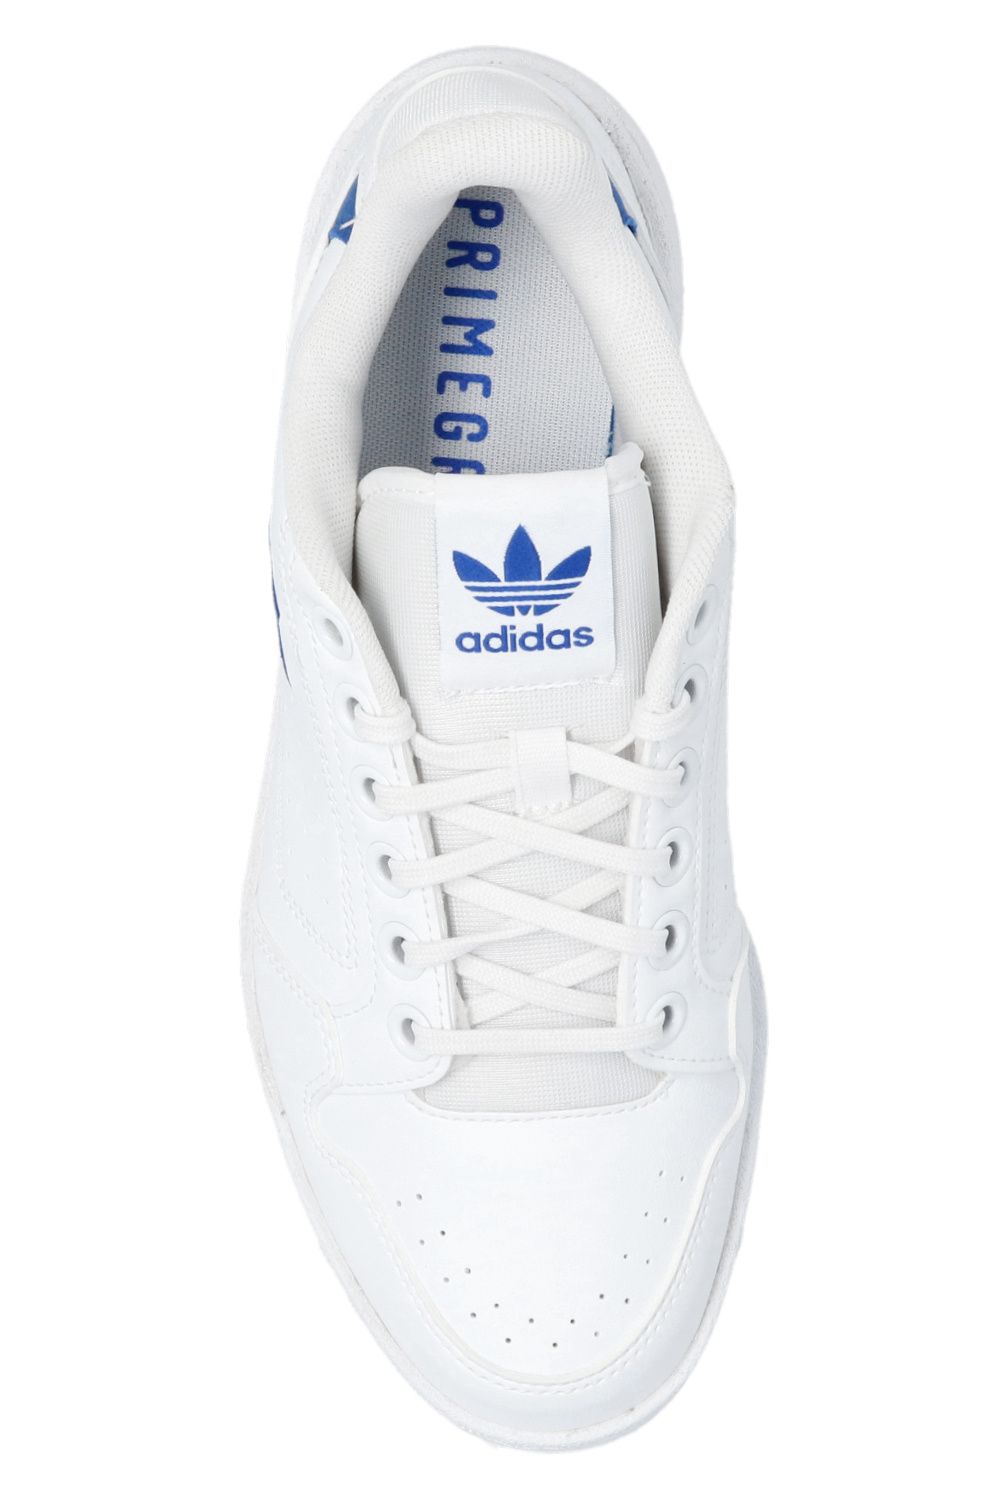 adidas Originals Sneakers - NEW 90 - White » Cheap Shipping